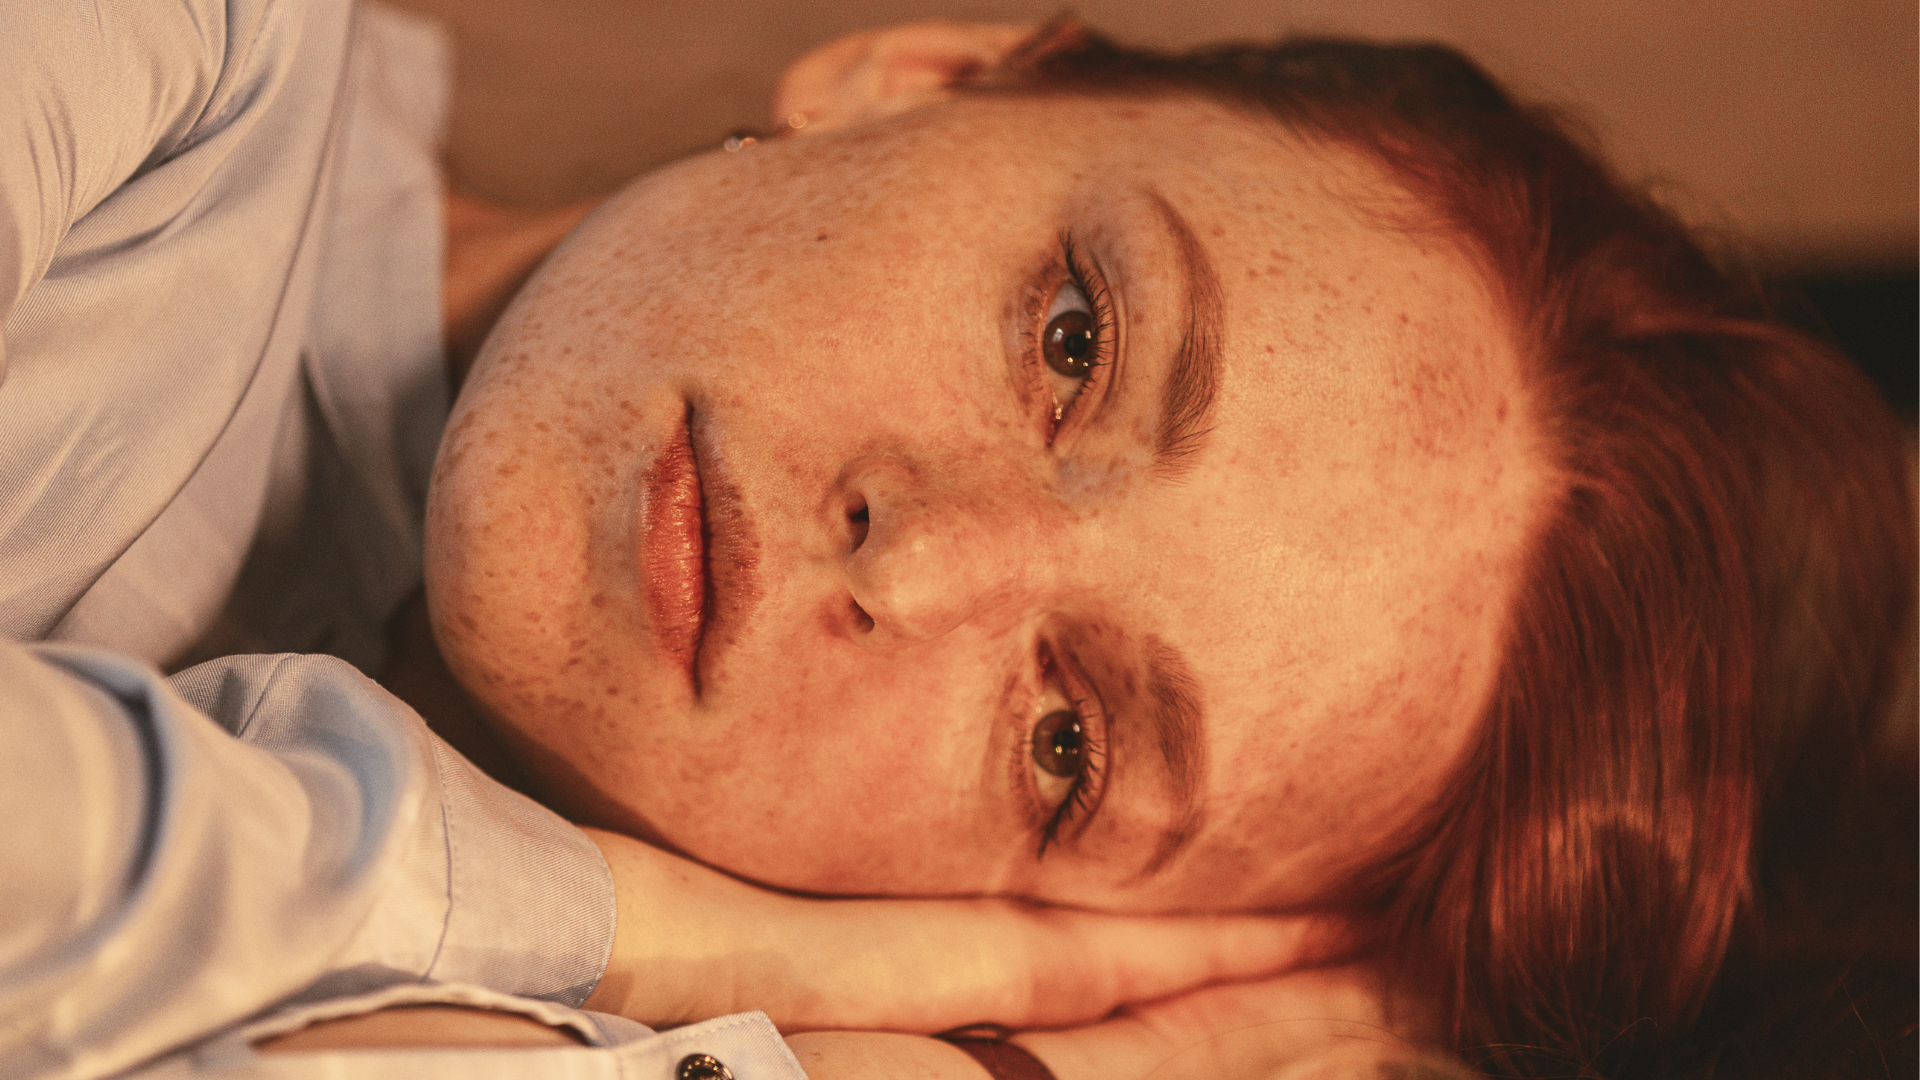 Freckles & Moles: This Is When Redheads Should Get Checked By A Dermatologist